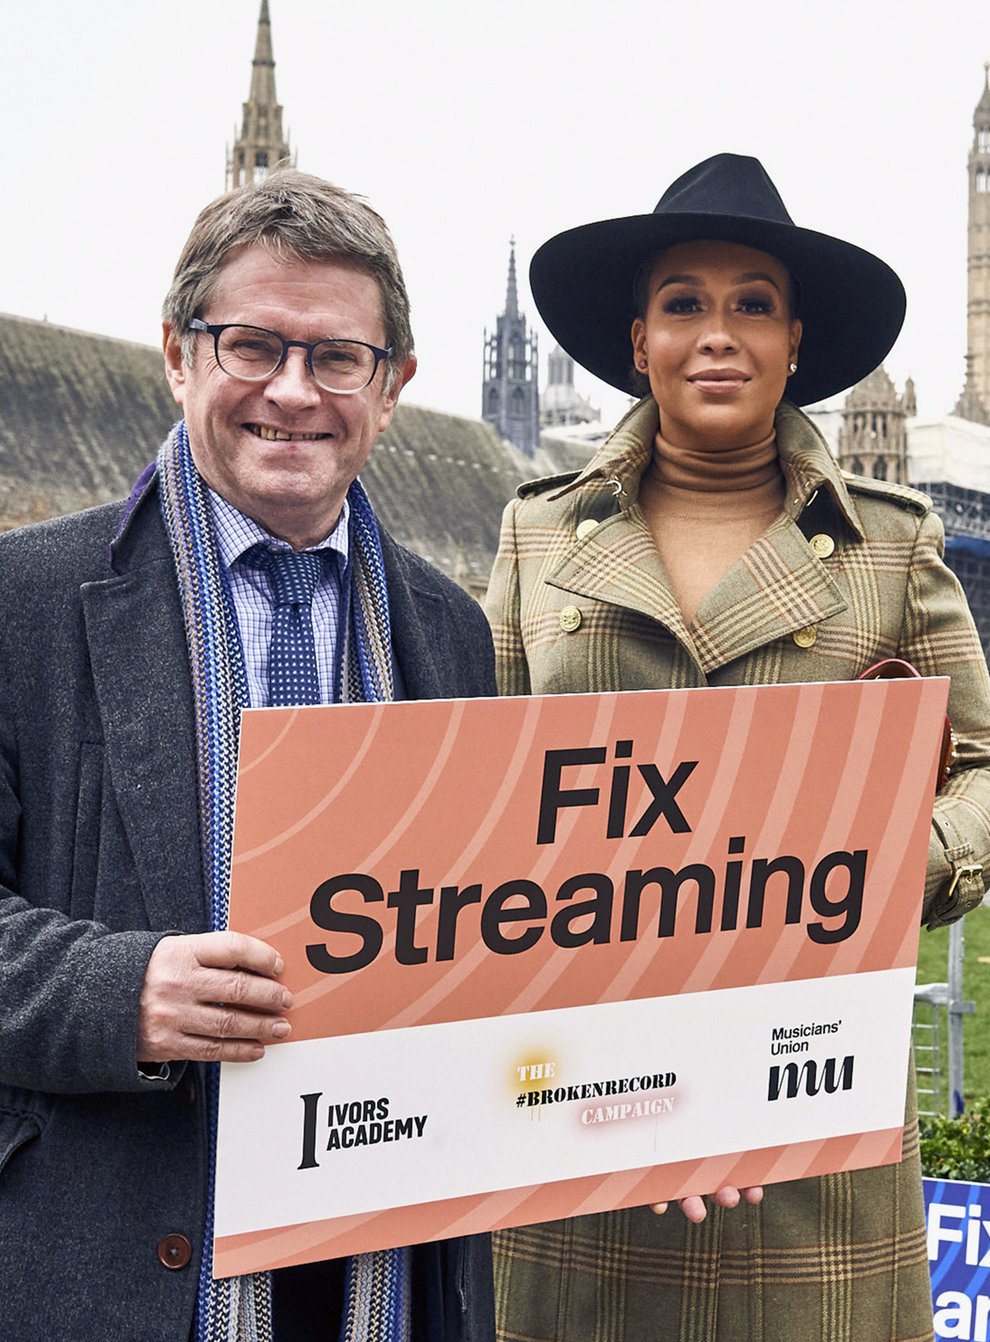 Kevin Brennan MP and Rebecca Ferguson in Parliament Square, Westminster, highlighting the Bill which aims to ensure artists are ‘fairly paid’ for streams of their music (Jonathan Stewart/PA)